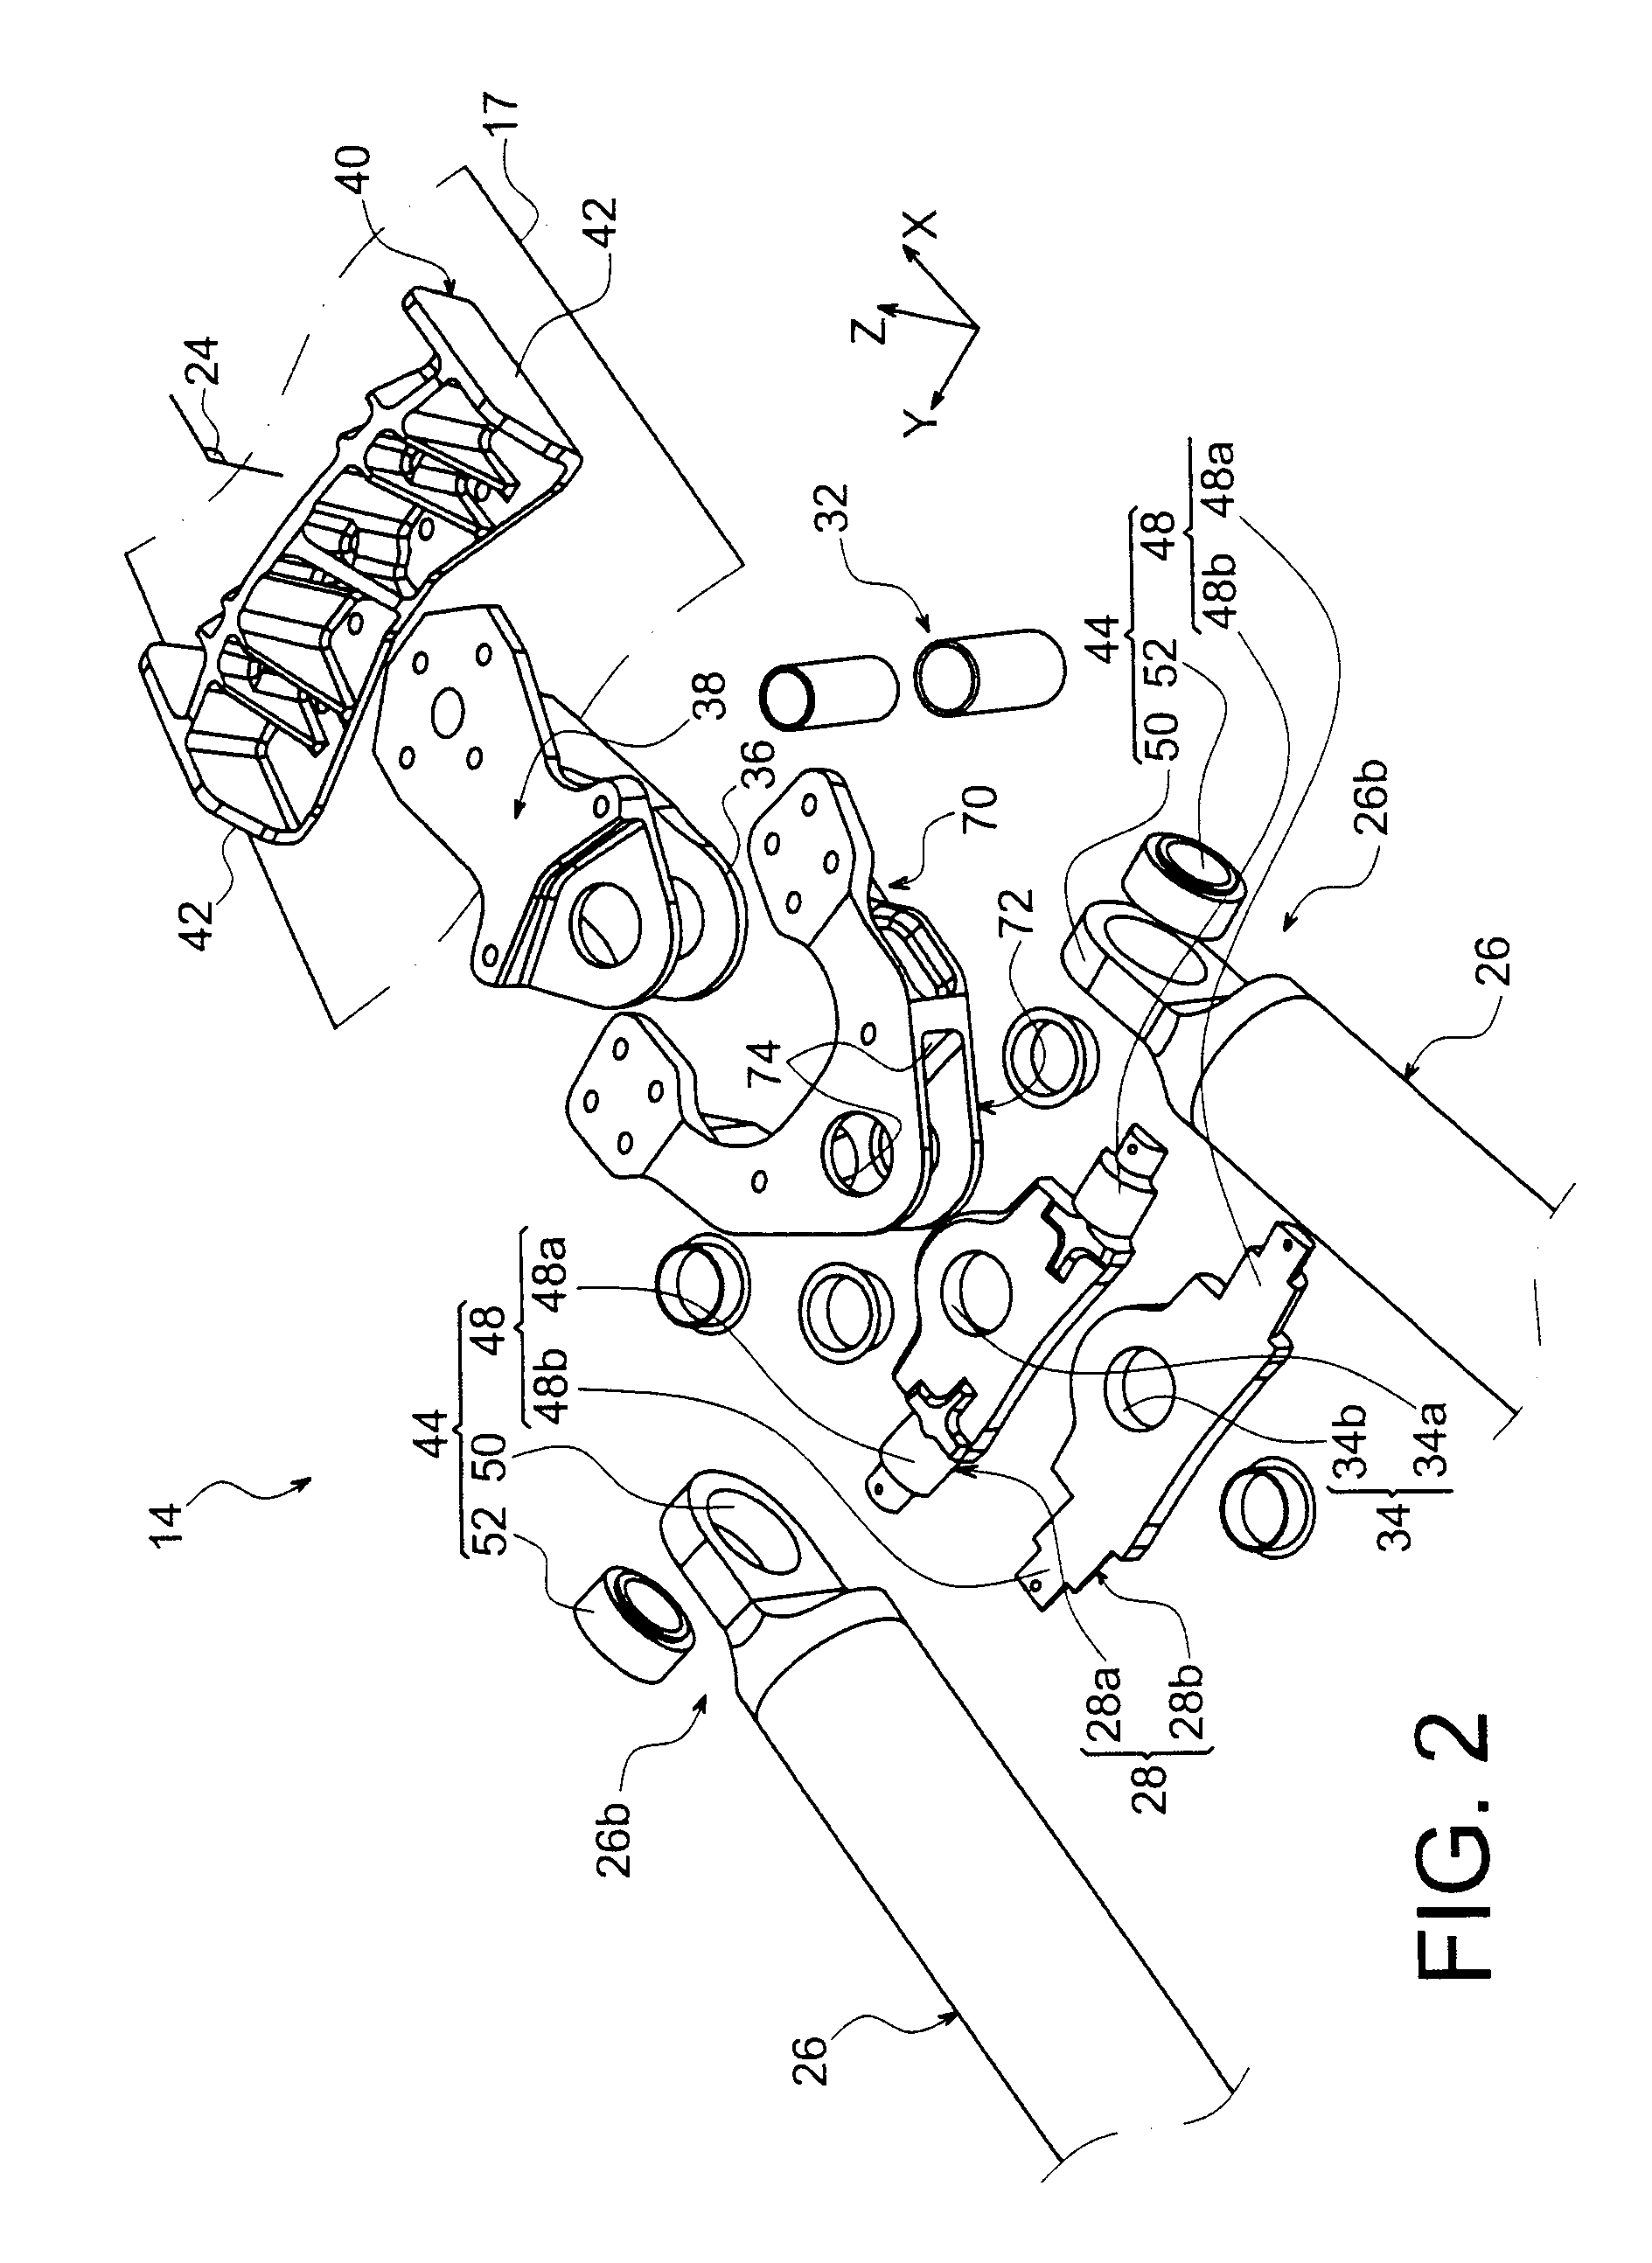 Aircraft engine mount structure comprising two thrust links with transverse fitting